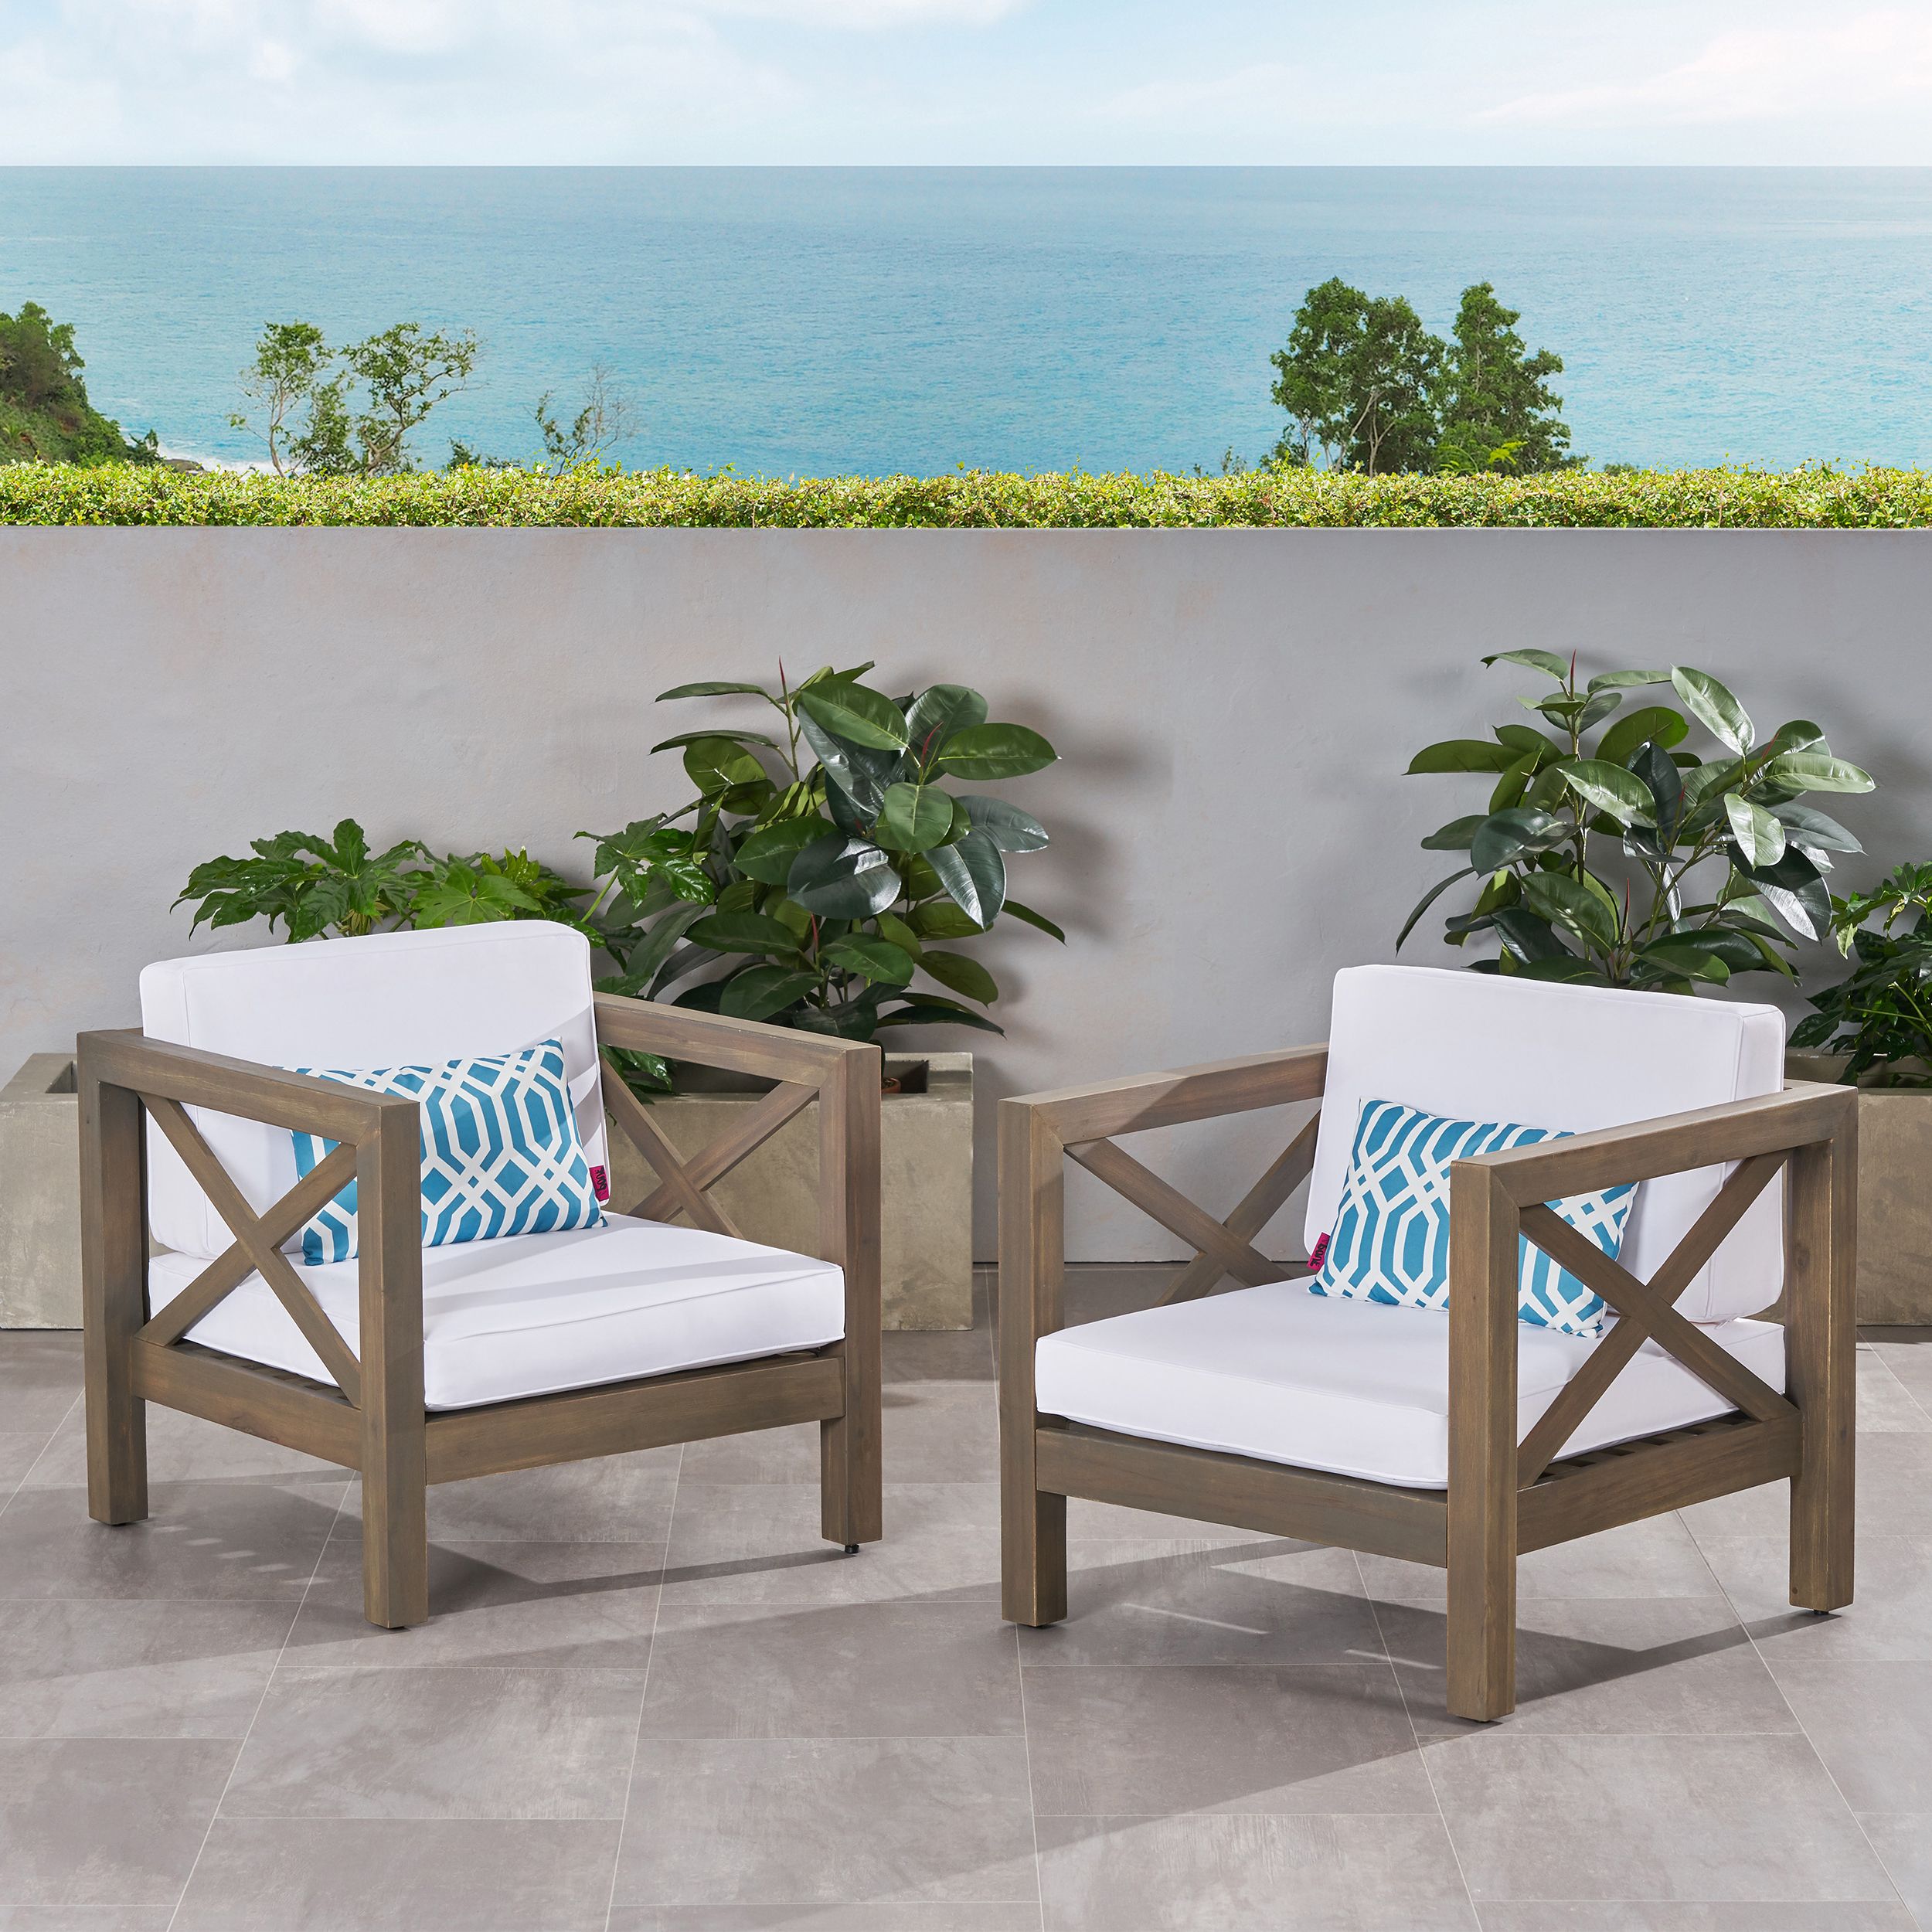 White Wood Soutdoor Seating Sets With Well Known Indira Outdoor Acacia Wood Club Chairs With Cushions (set Of 2), Gray (View 8 of 15)